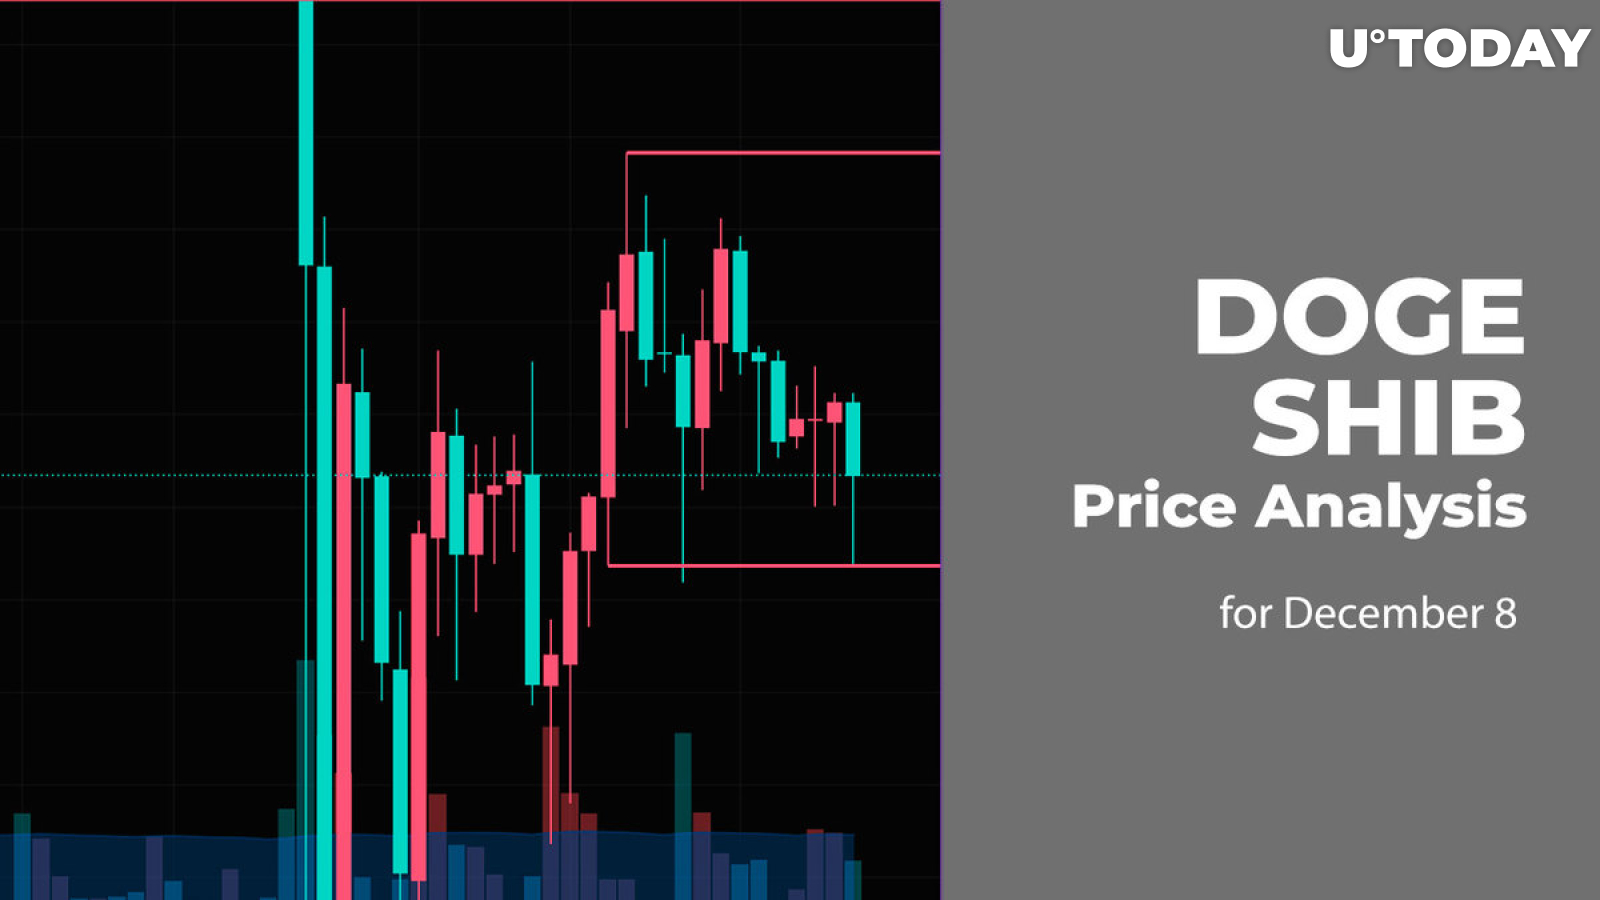 DOGE and SHIB Price Analysis for December 8